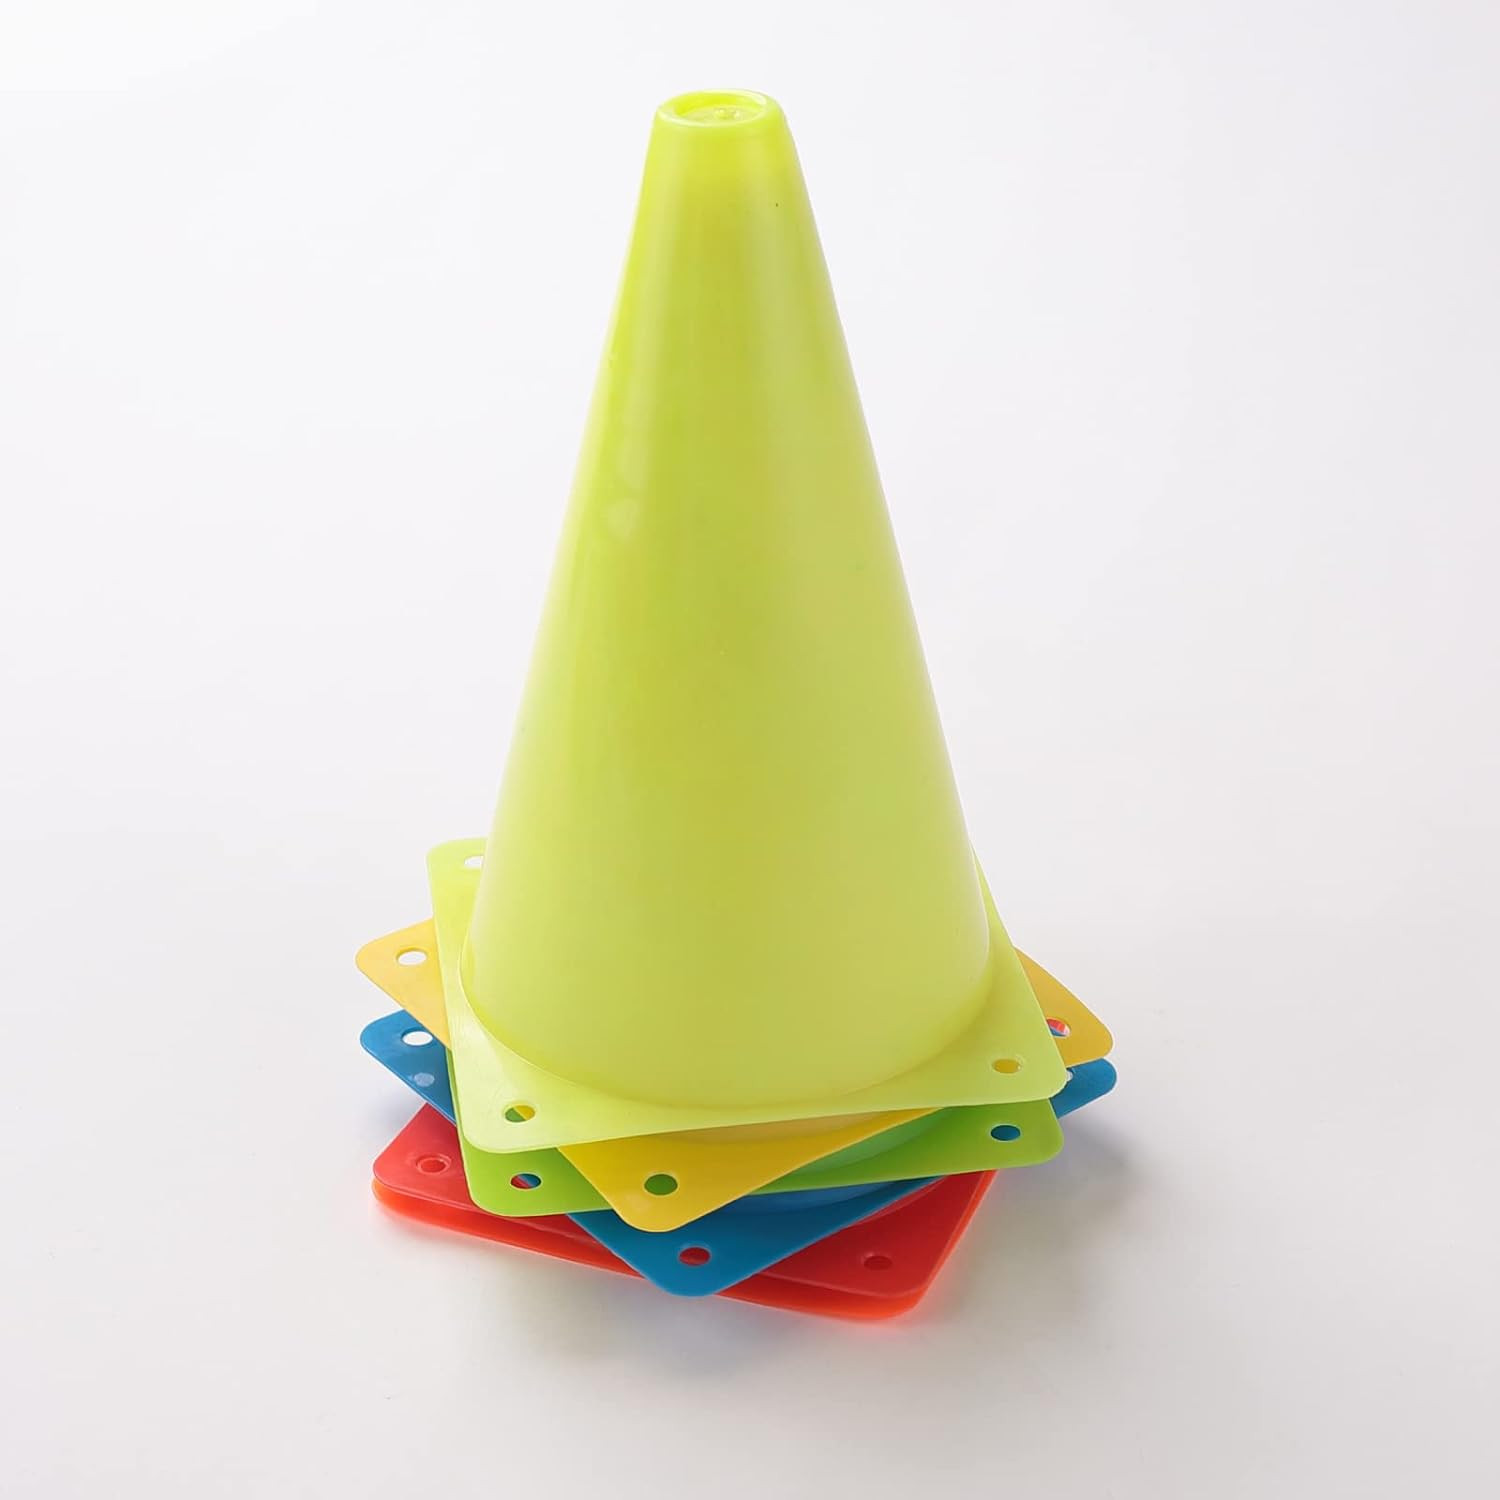 Kuber Industries Sports Agility Training Ground Marker Cone Pack of 6 (Multicolor)